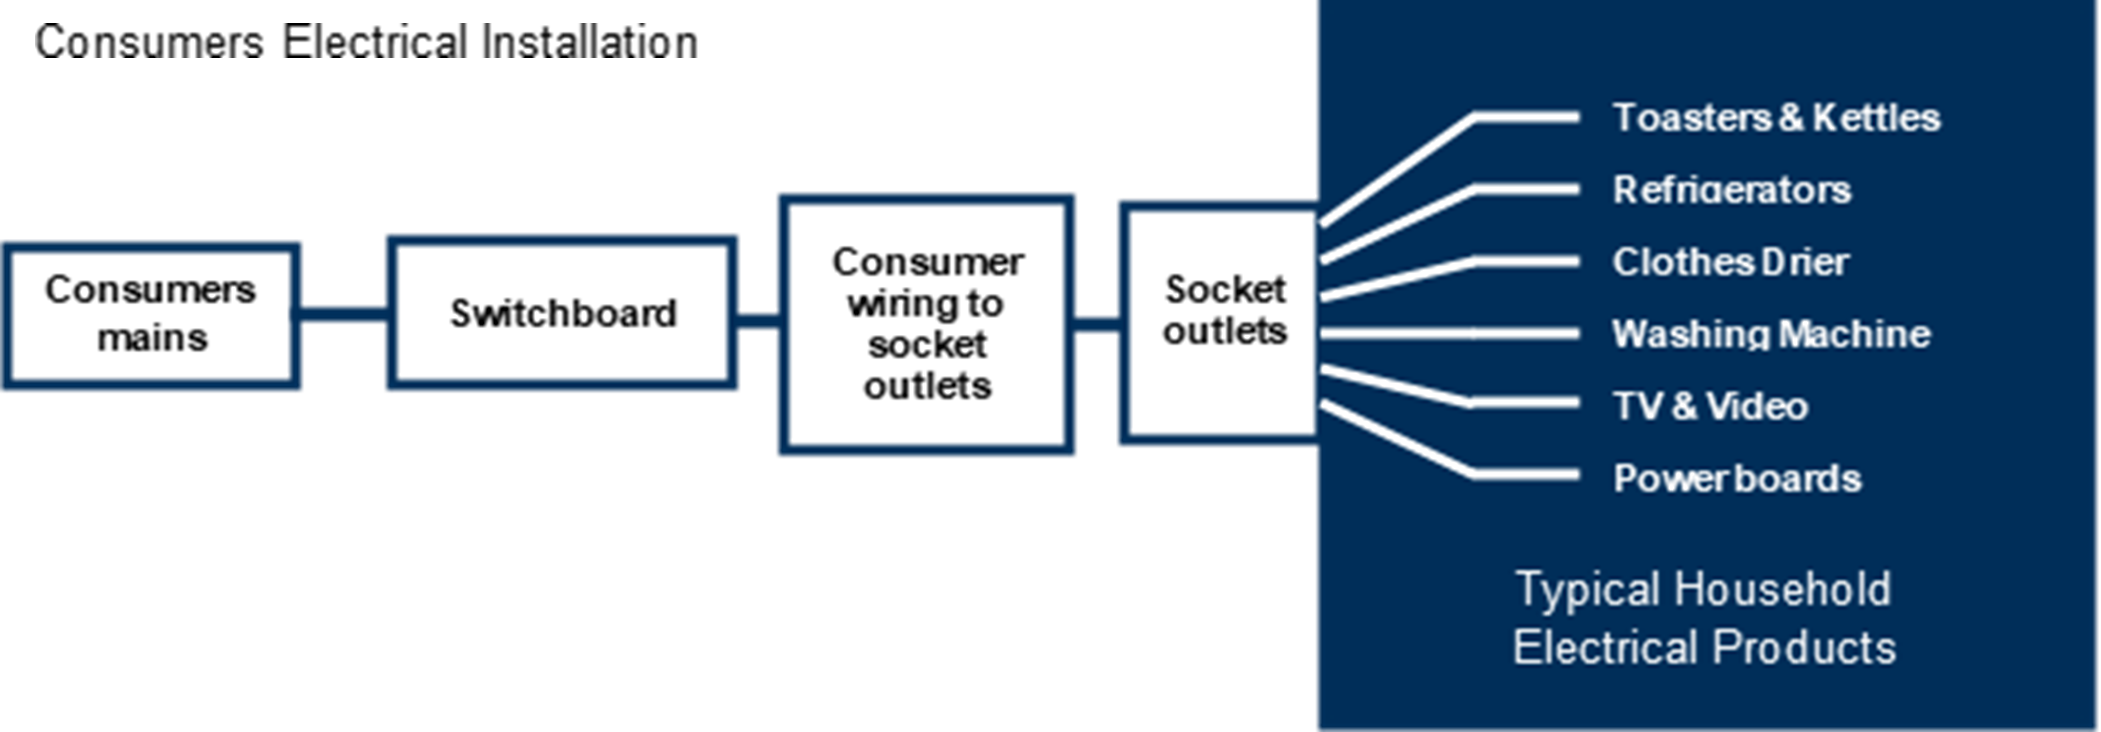 Boundary of installations from products. It depicts Consumers electrical installation. Going from left to right, it starts with Consumer mains, then Switchboard, then Consumer wiring to socket outlets, then Socket outlets, and then finally to typical household electrical products such as toasters, kettles, washing machine and TV. 